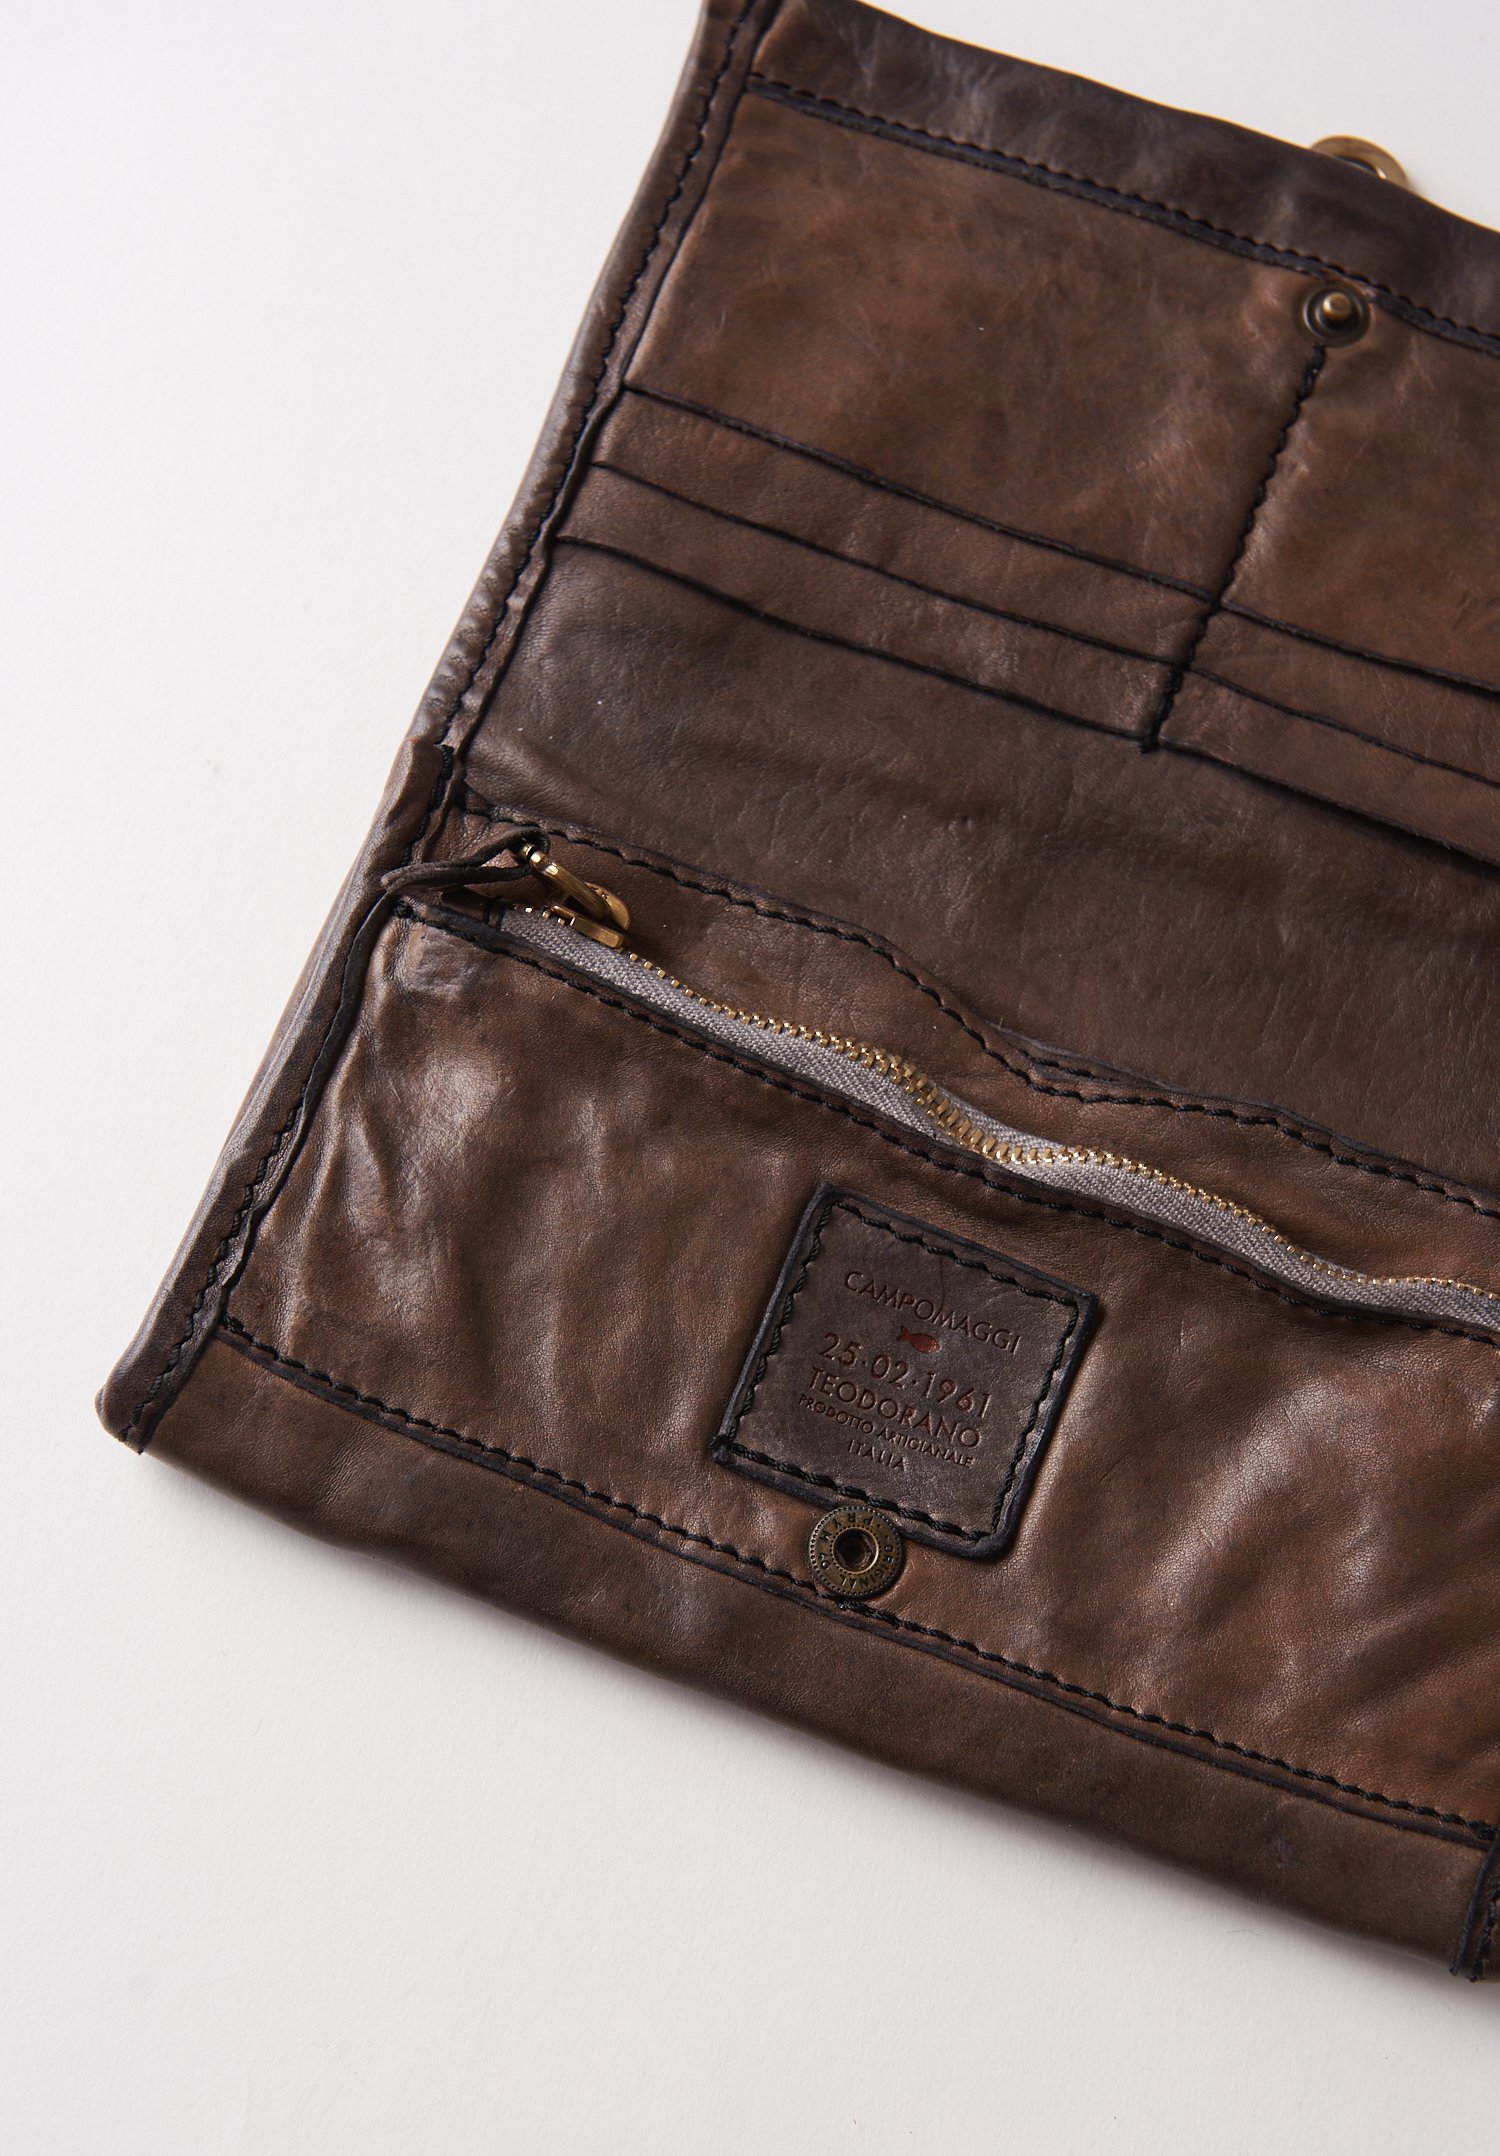 Campomaggi Leather Wallet in Grey | Santa Fe Dry Goods Trippen ...